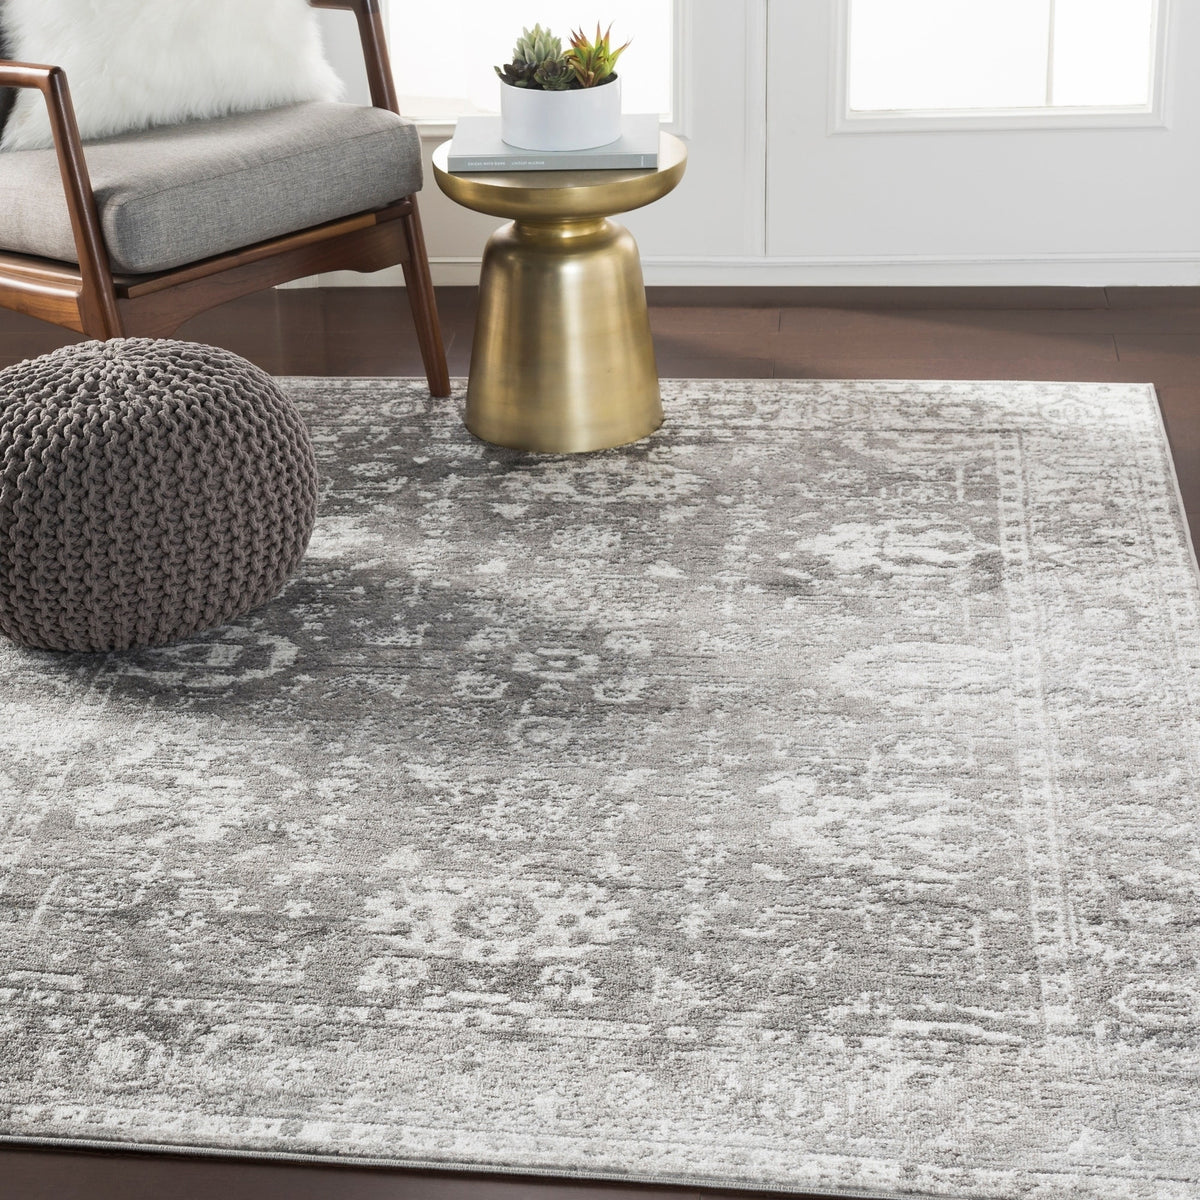 Reimes Gray Distressed Traditional Area Rug 53 X 73 33dc15dc C938 4f52 8019 5d4c0a4077bb 1200x1200 ?v=1571709525